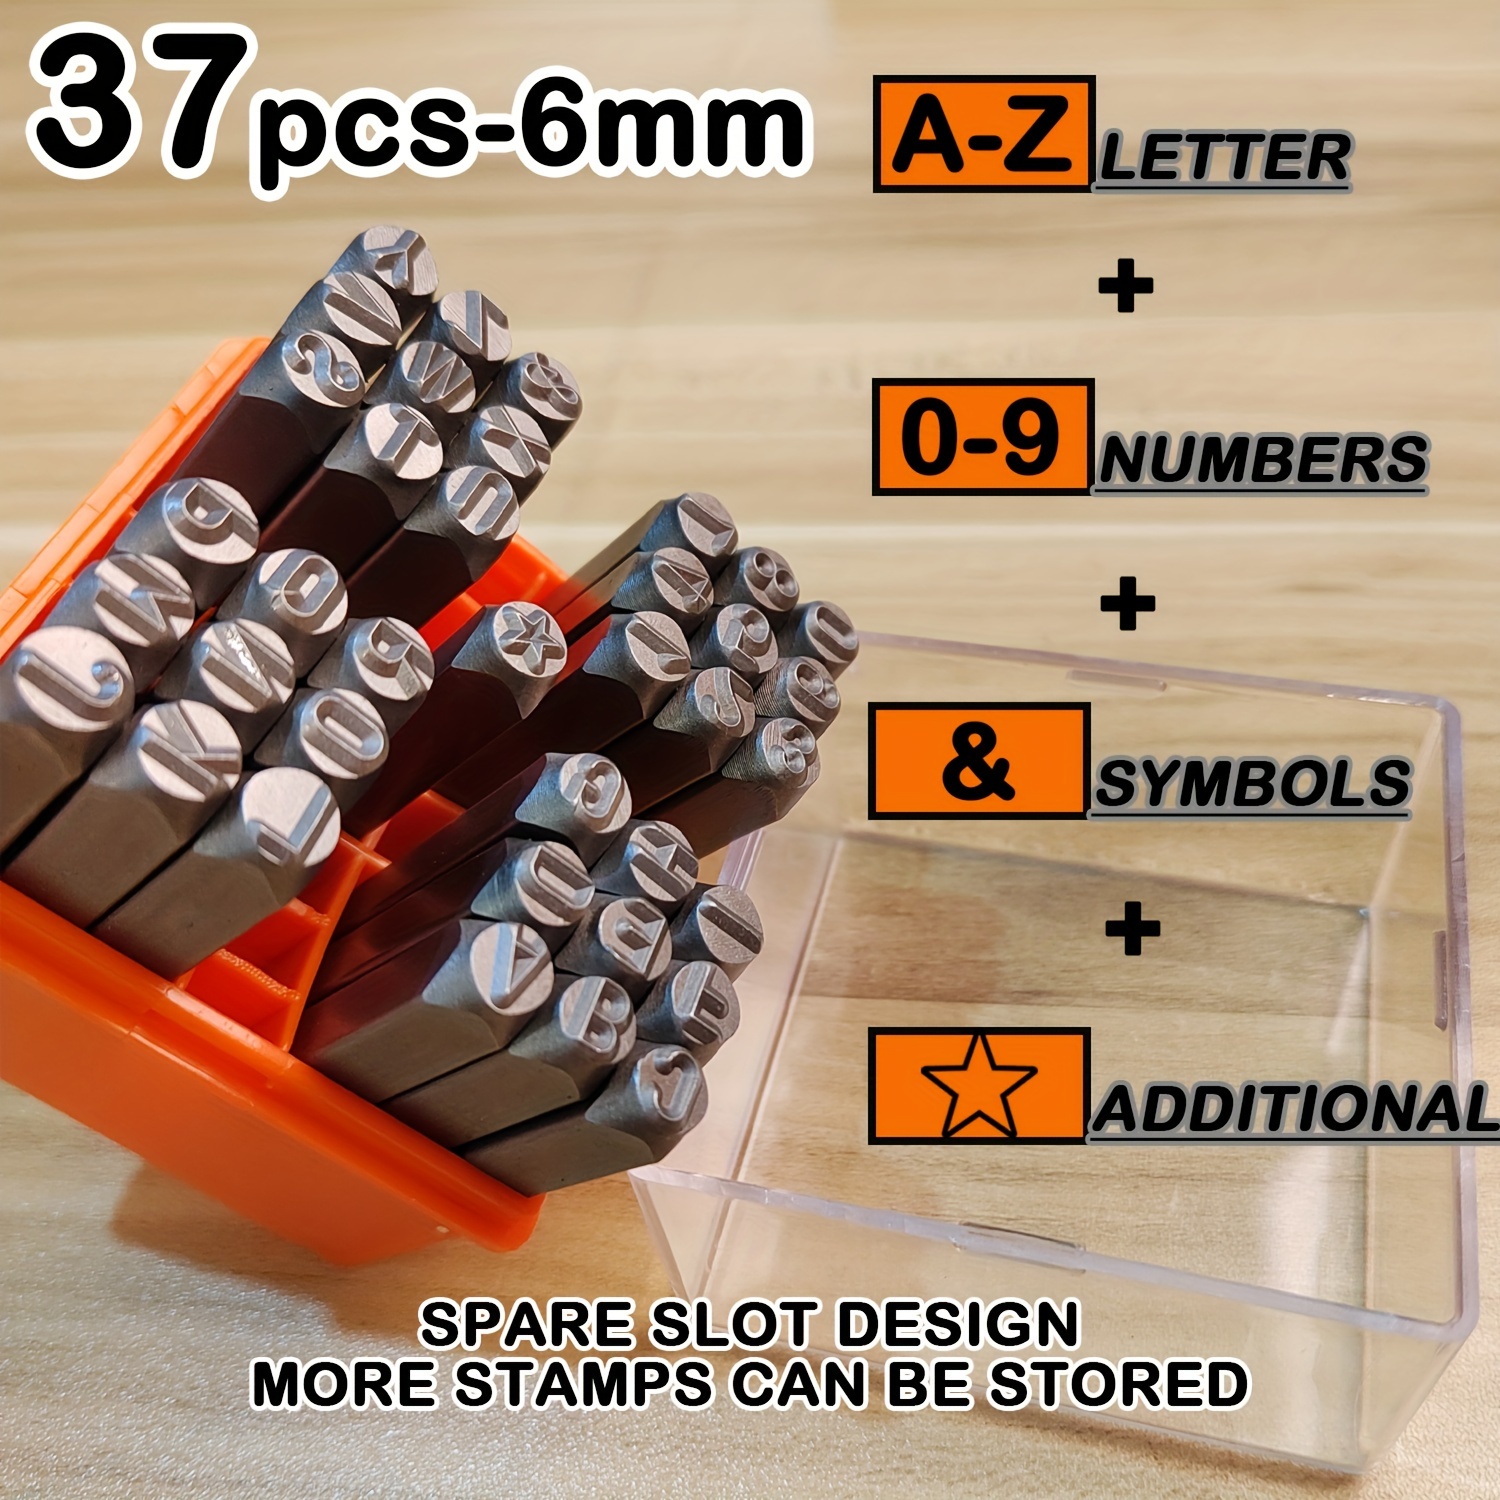 

37-piece Number And Letter Stamp Set 1/4 (6mm) (a-z & 0-8 + Stars, Use The 6 As A 9) Cr-v Steel, Perfect For Most Stamping Applications,beautifully Packaged As A Gift